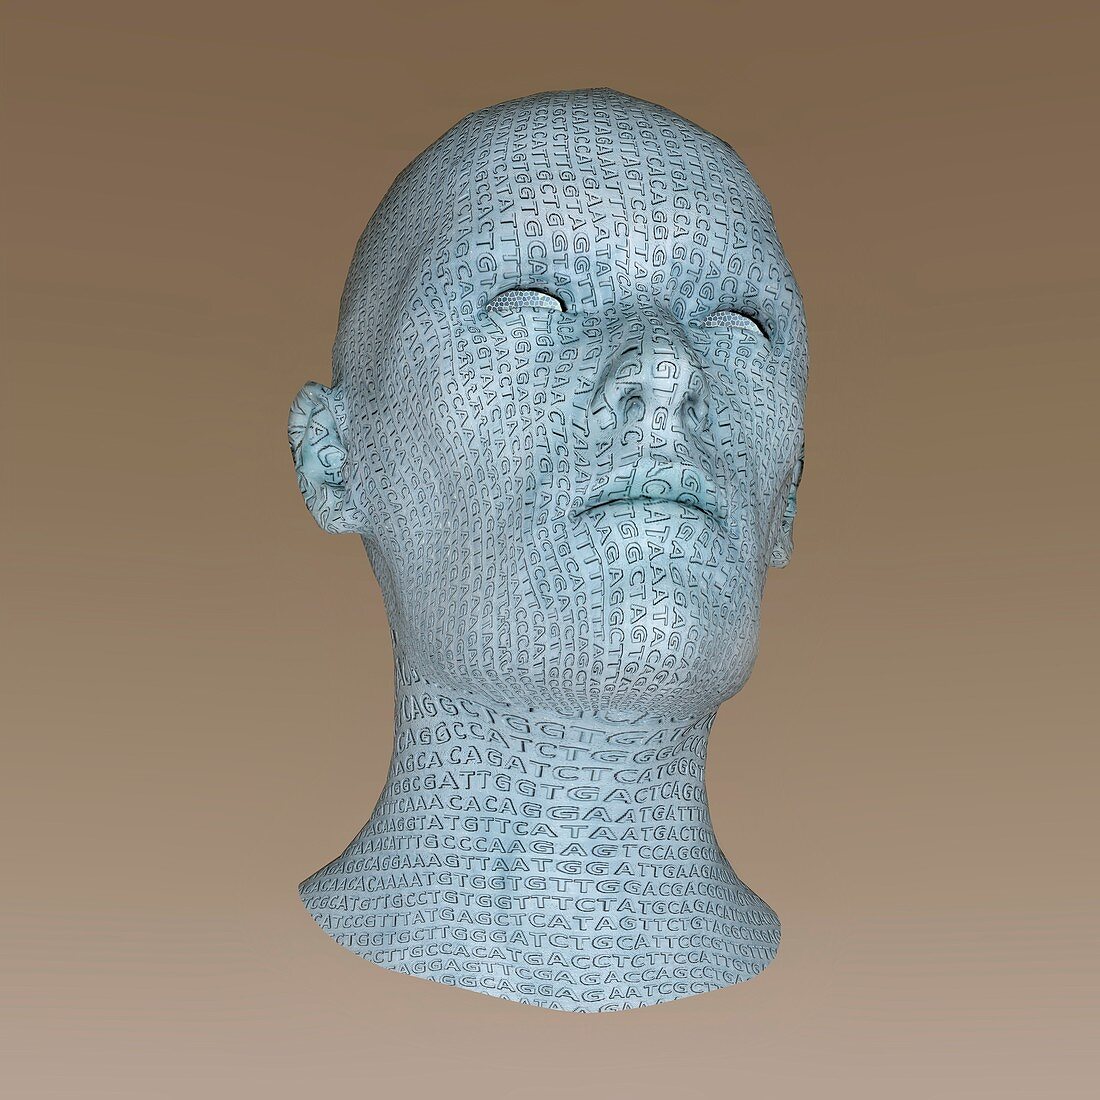 Head engraved with DNA, illustration